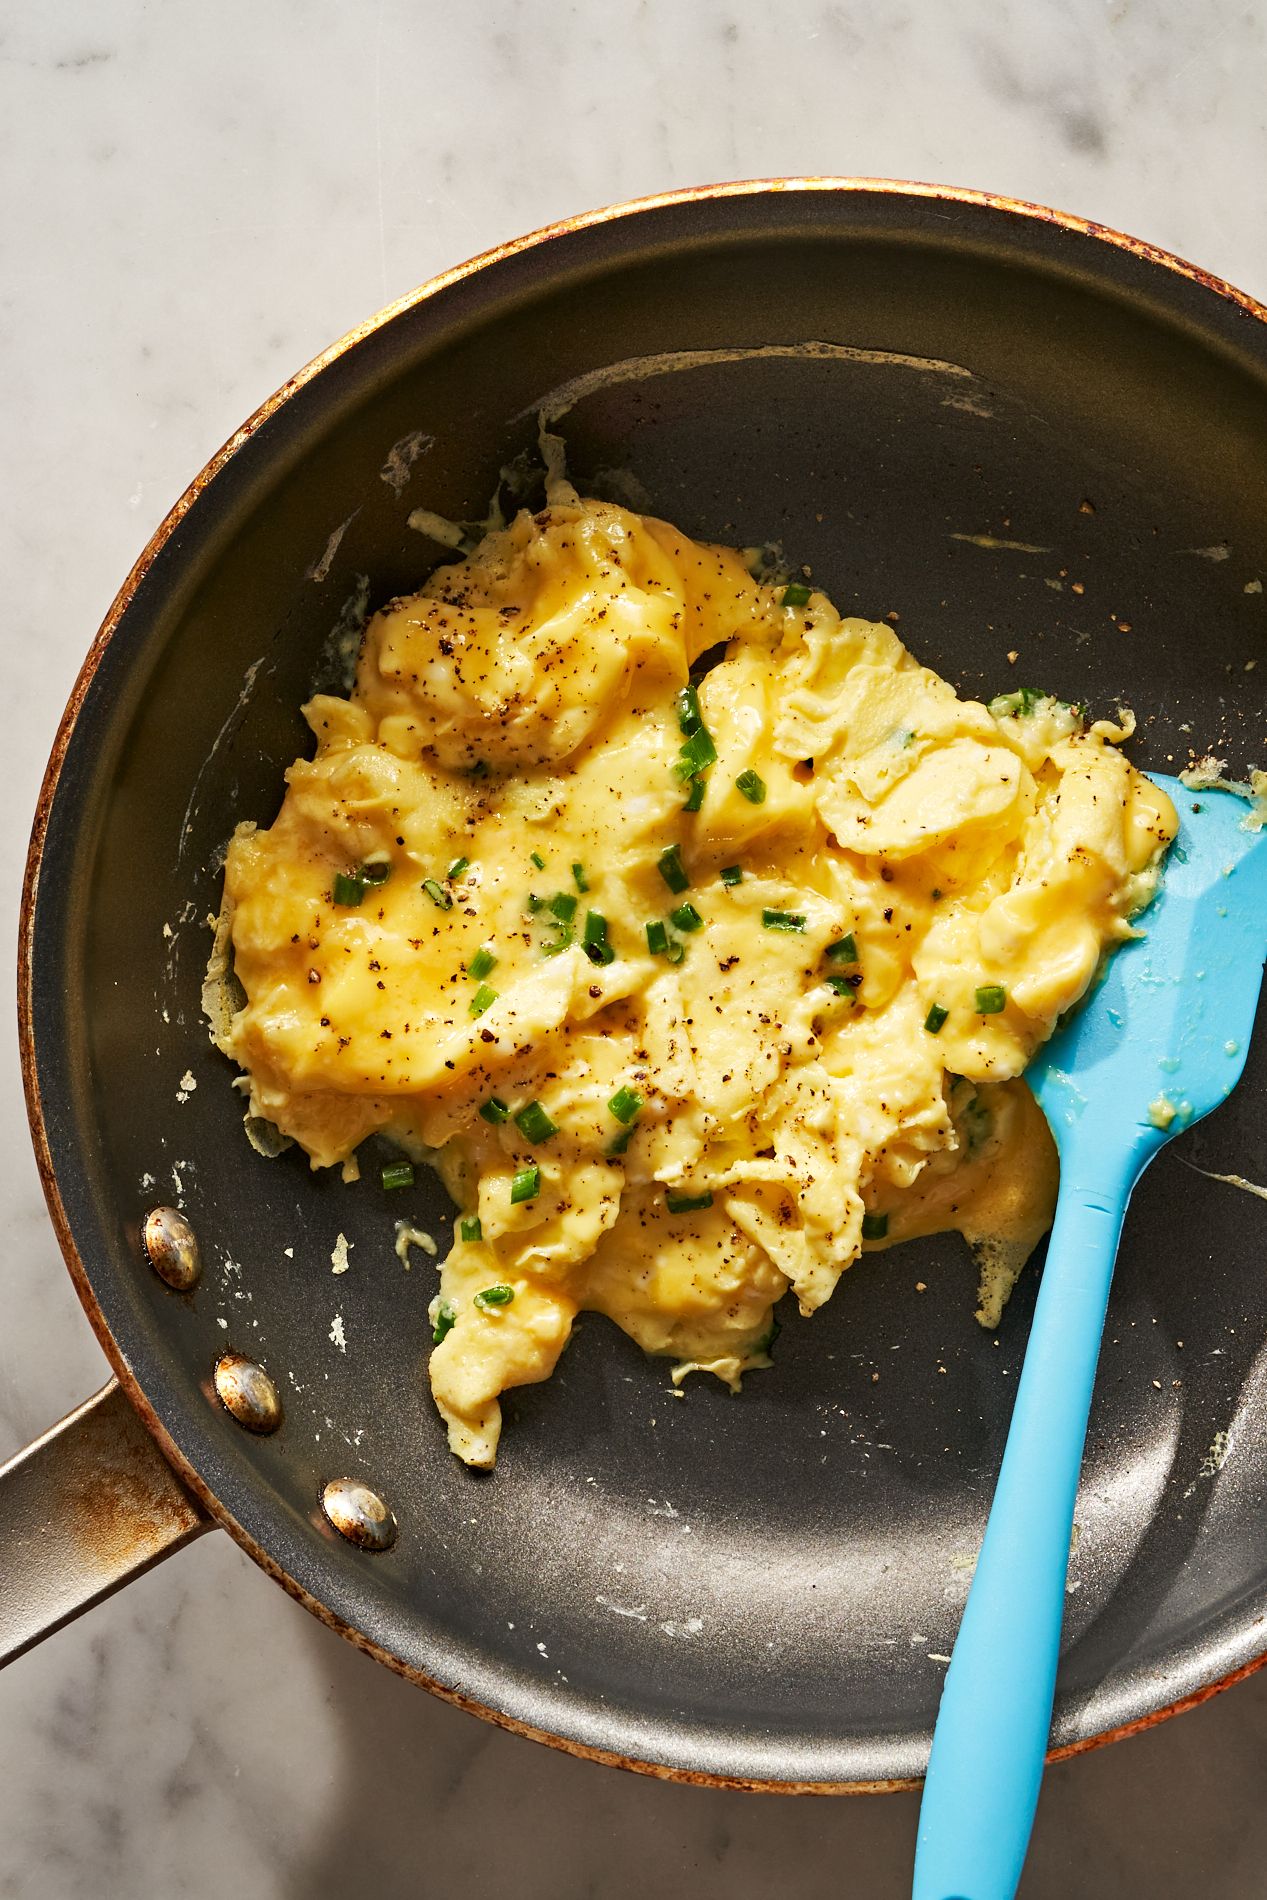 For the Best Scrambled Eggs, Cook Them In Brown Butter